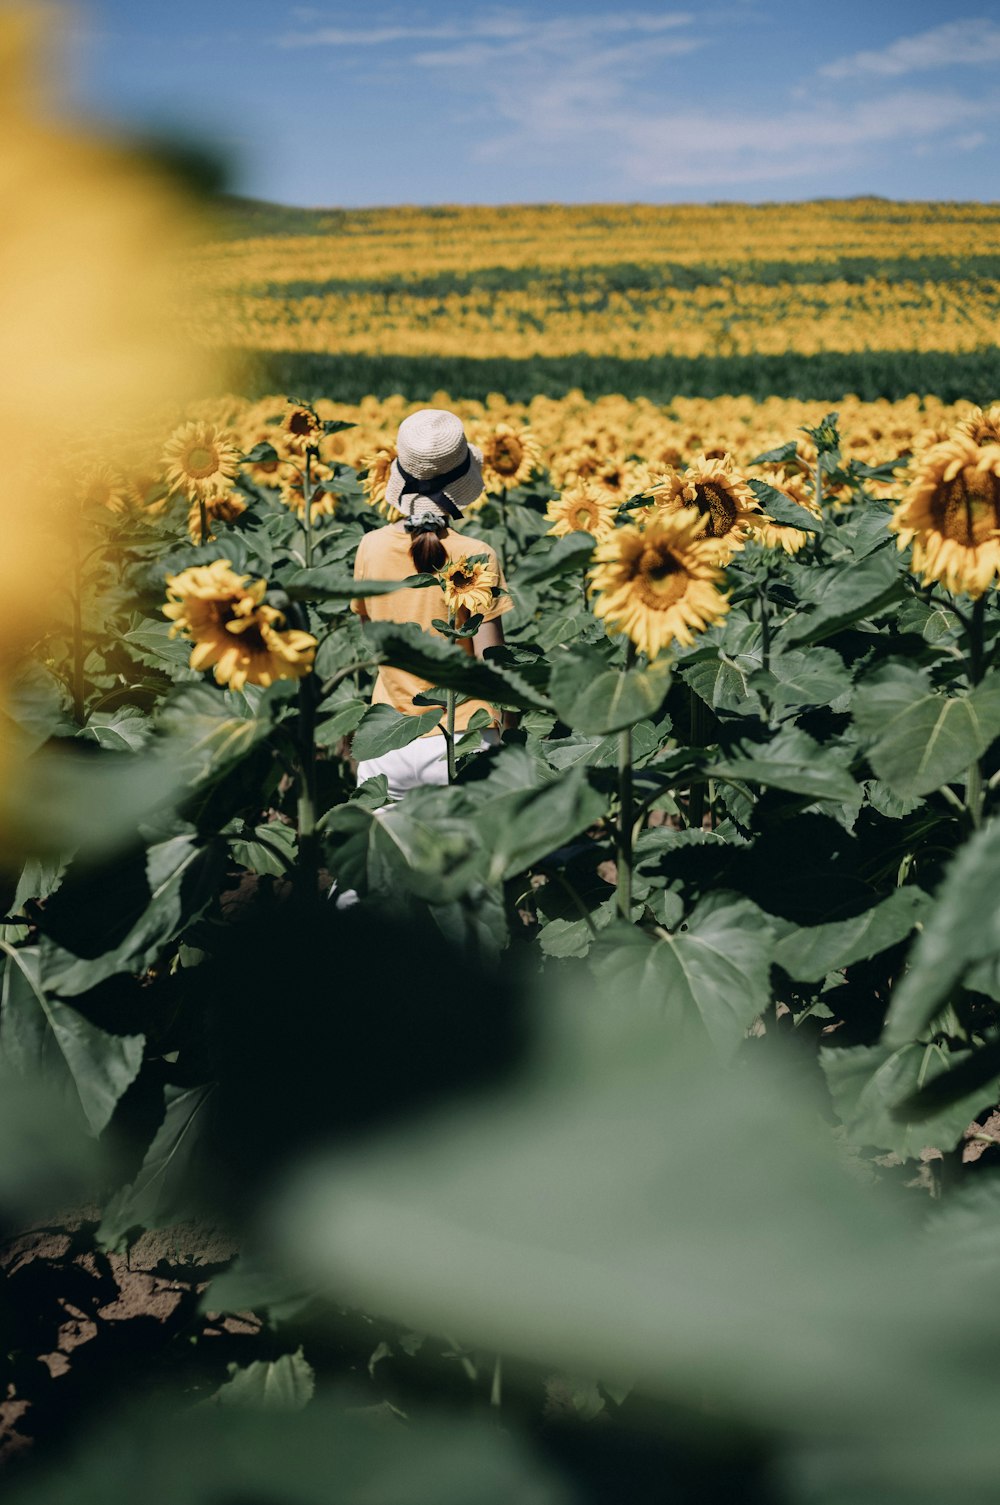 a person standing in a field of sunflowers